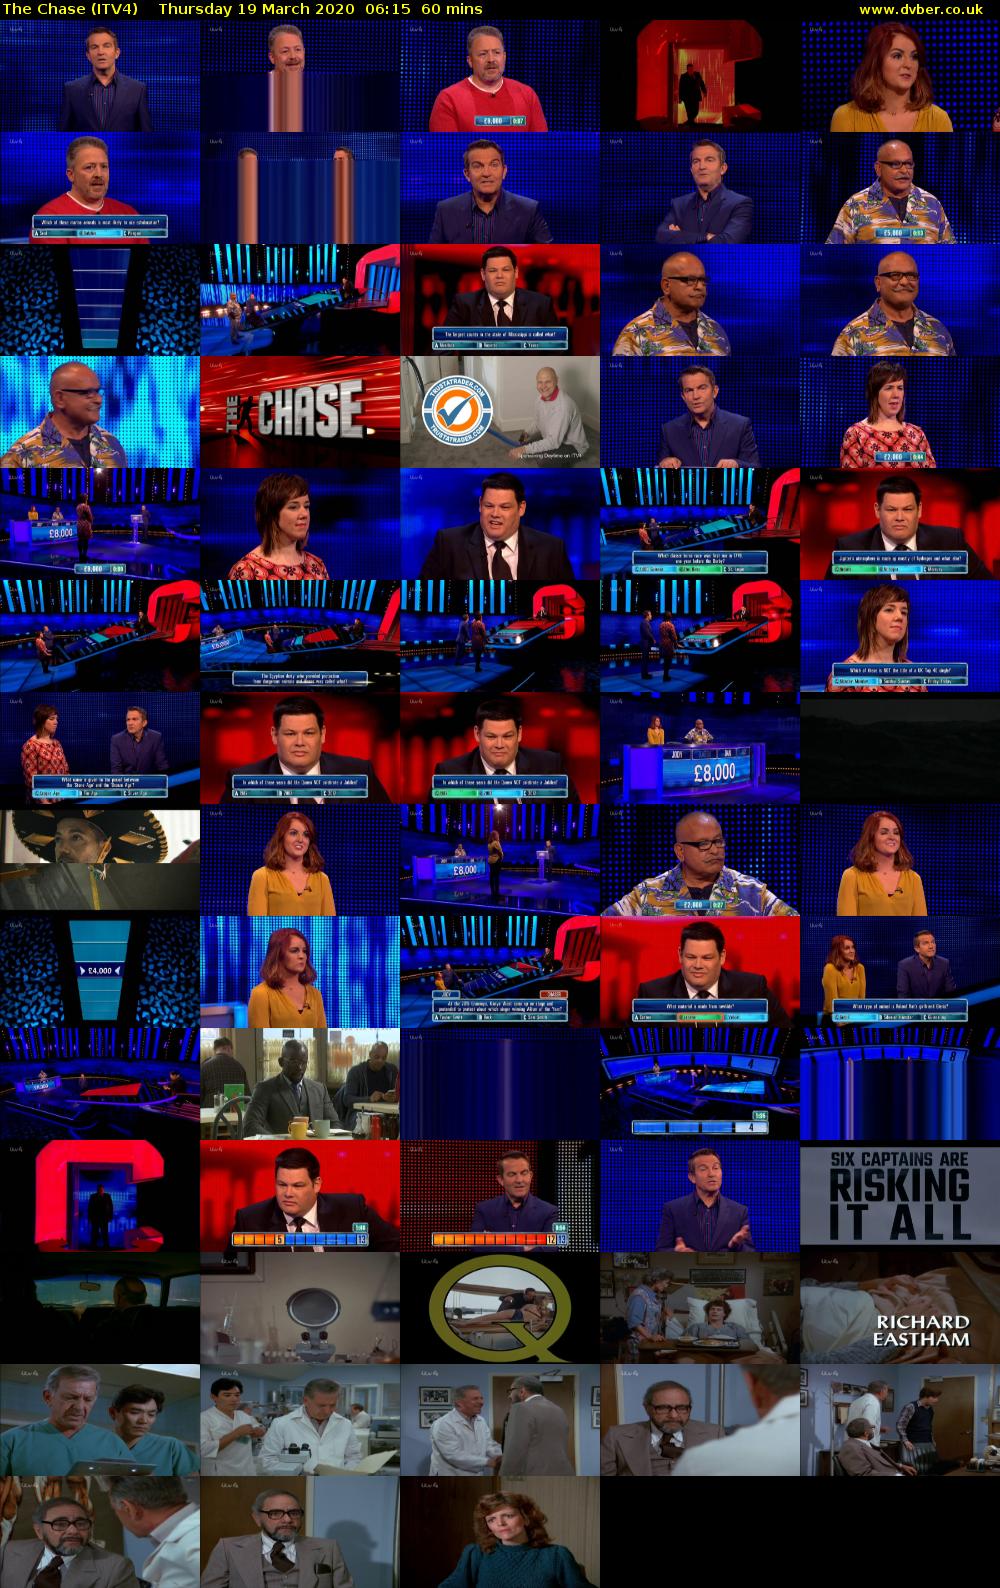 The Chase (ITV4) Thursday 19 March 2020 06:15 - 07:15